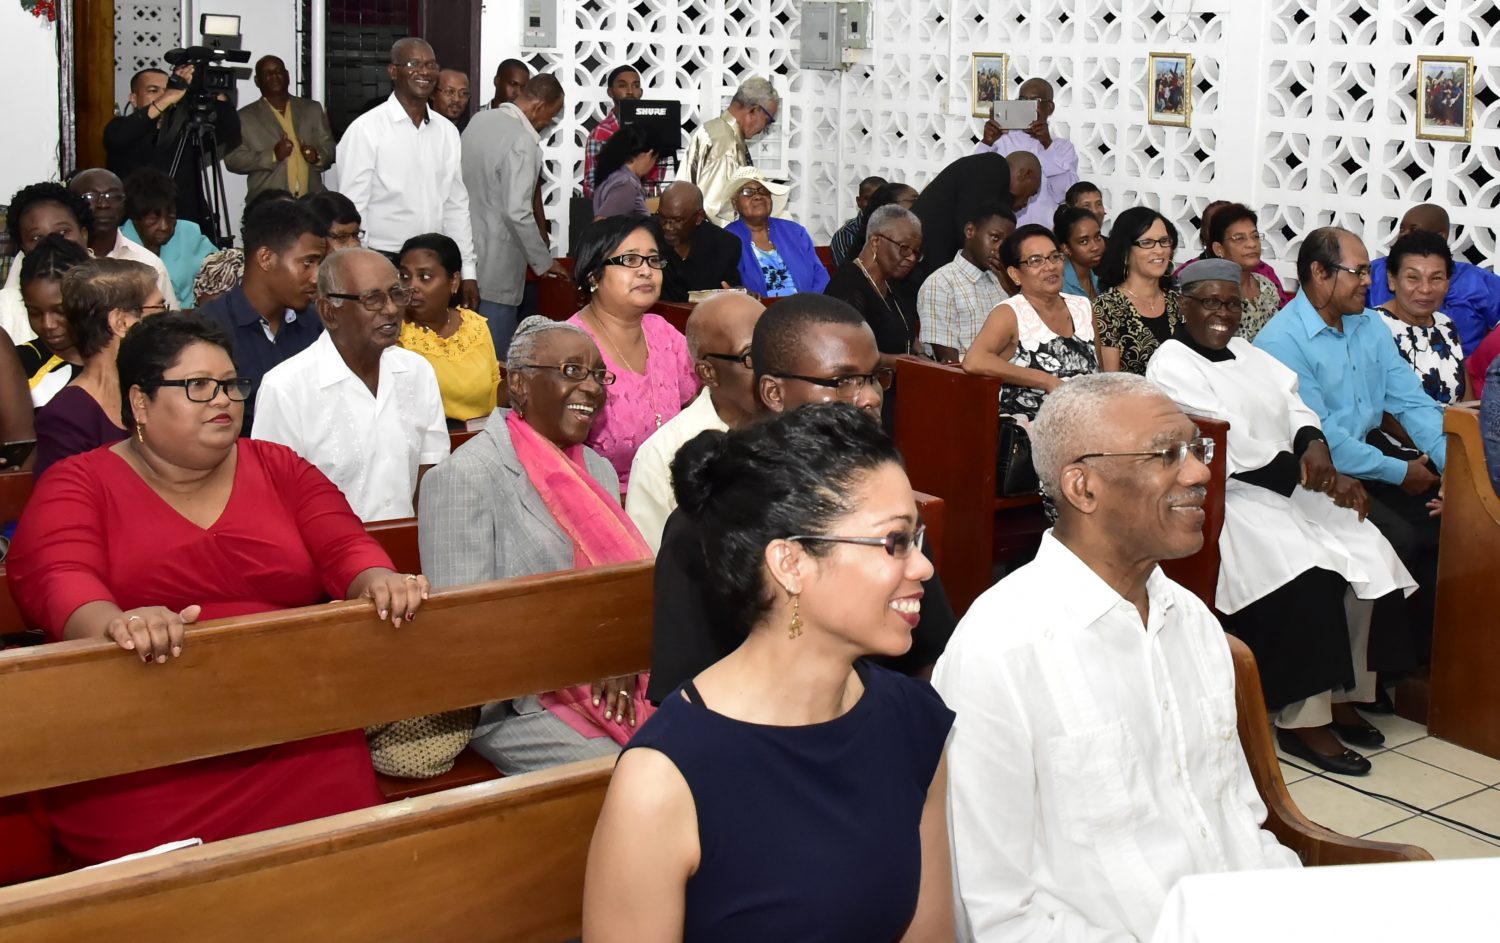 President David Granger (right in foreground), on Sunday evening, joined with the congregation at the St. Mary’s Anglican Church at Soesdyke, East Bank Demerara to ring in the New Year. The Head of State was accompanied by his daughter,  Afuwa Granger. (Ministry of the Presidency photo)